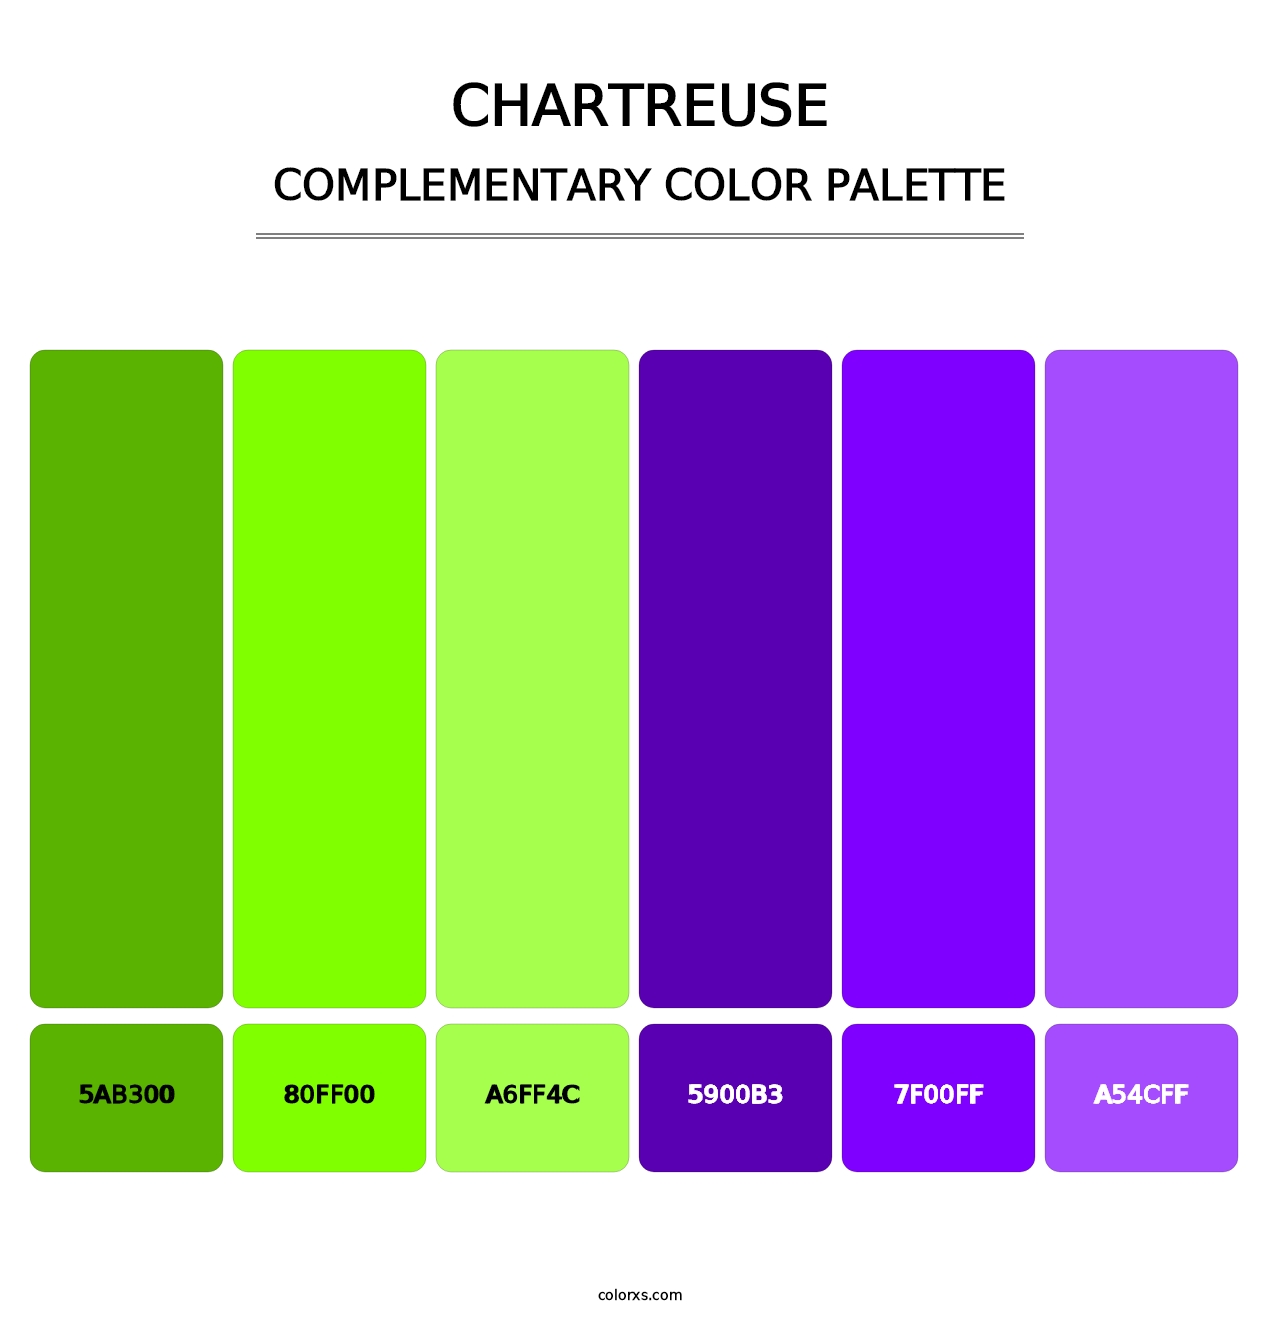 Chartreuse - Complementary Color Palette